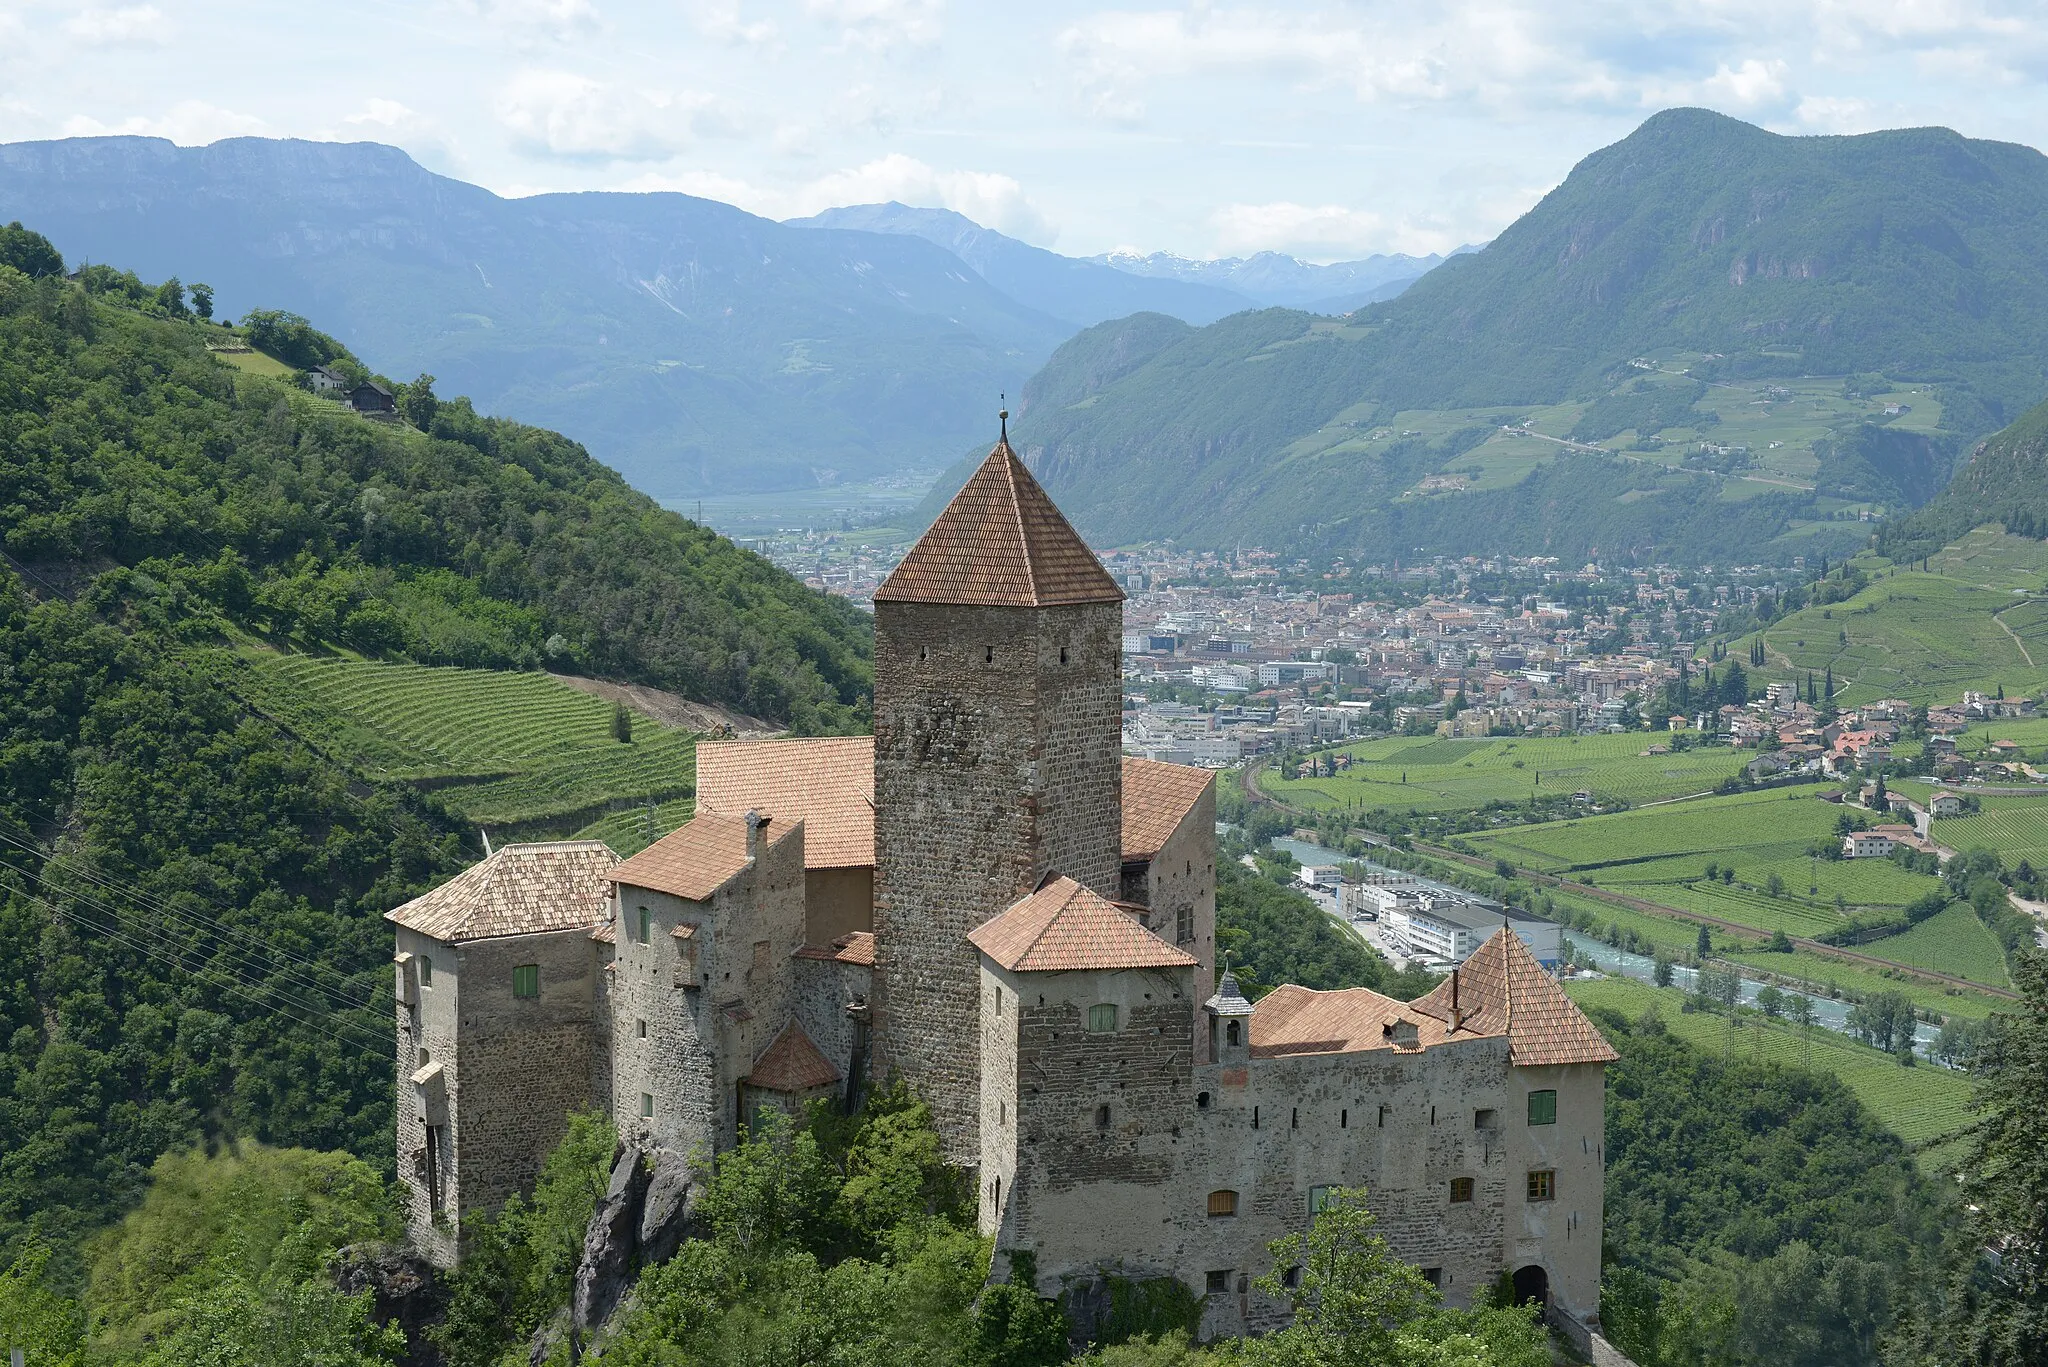 Photo showing: The Castle Karneid and the city of Bozen in South Tyrol